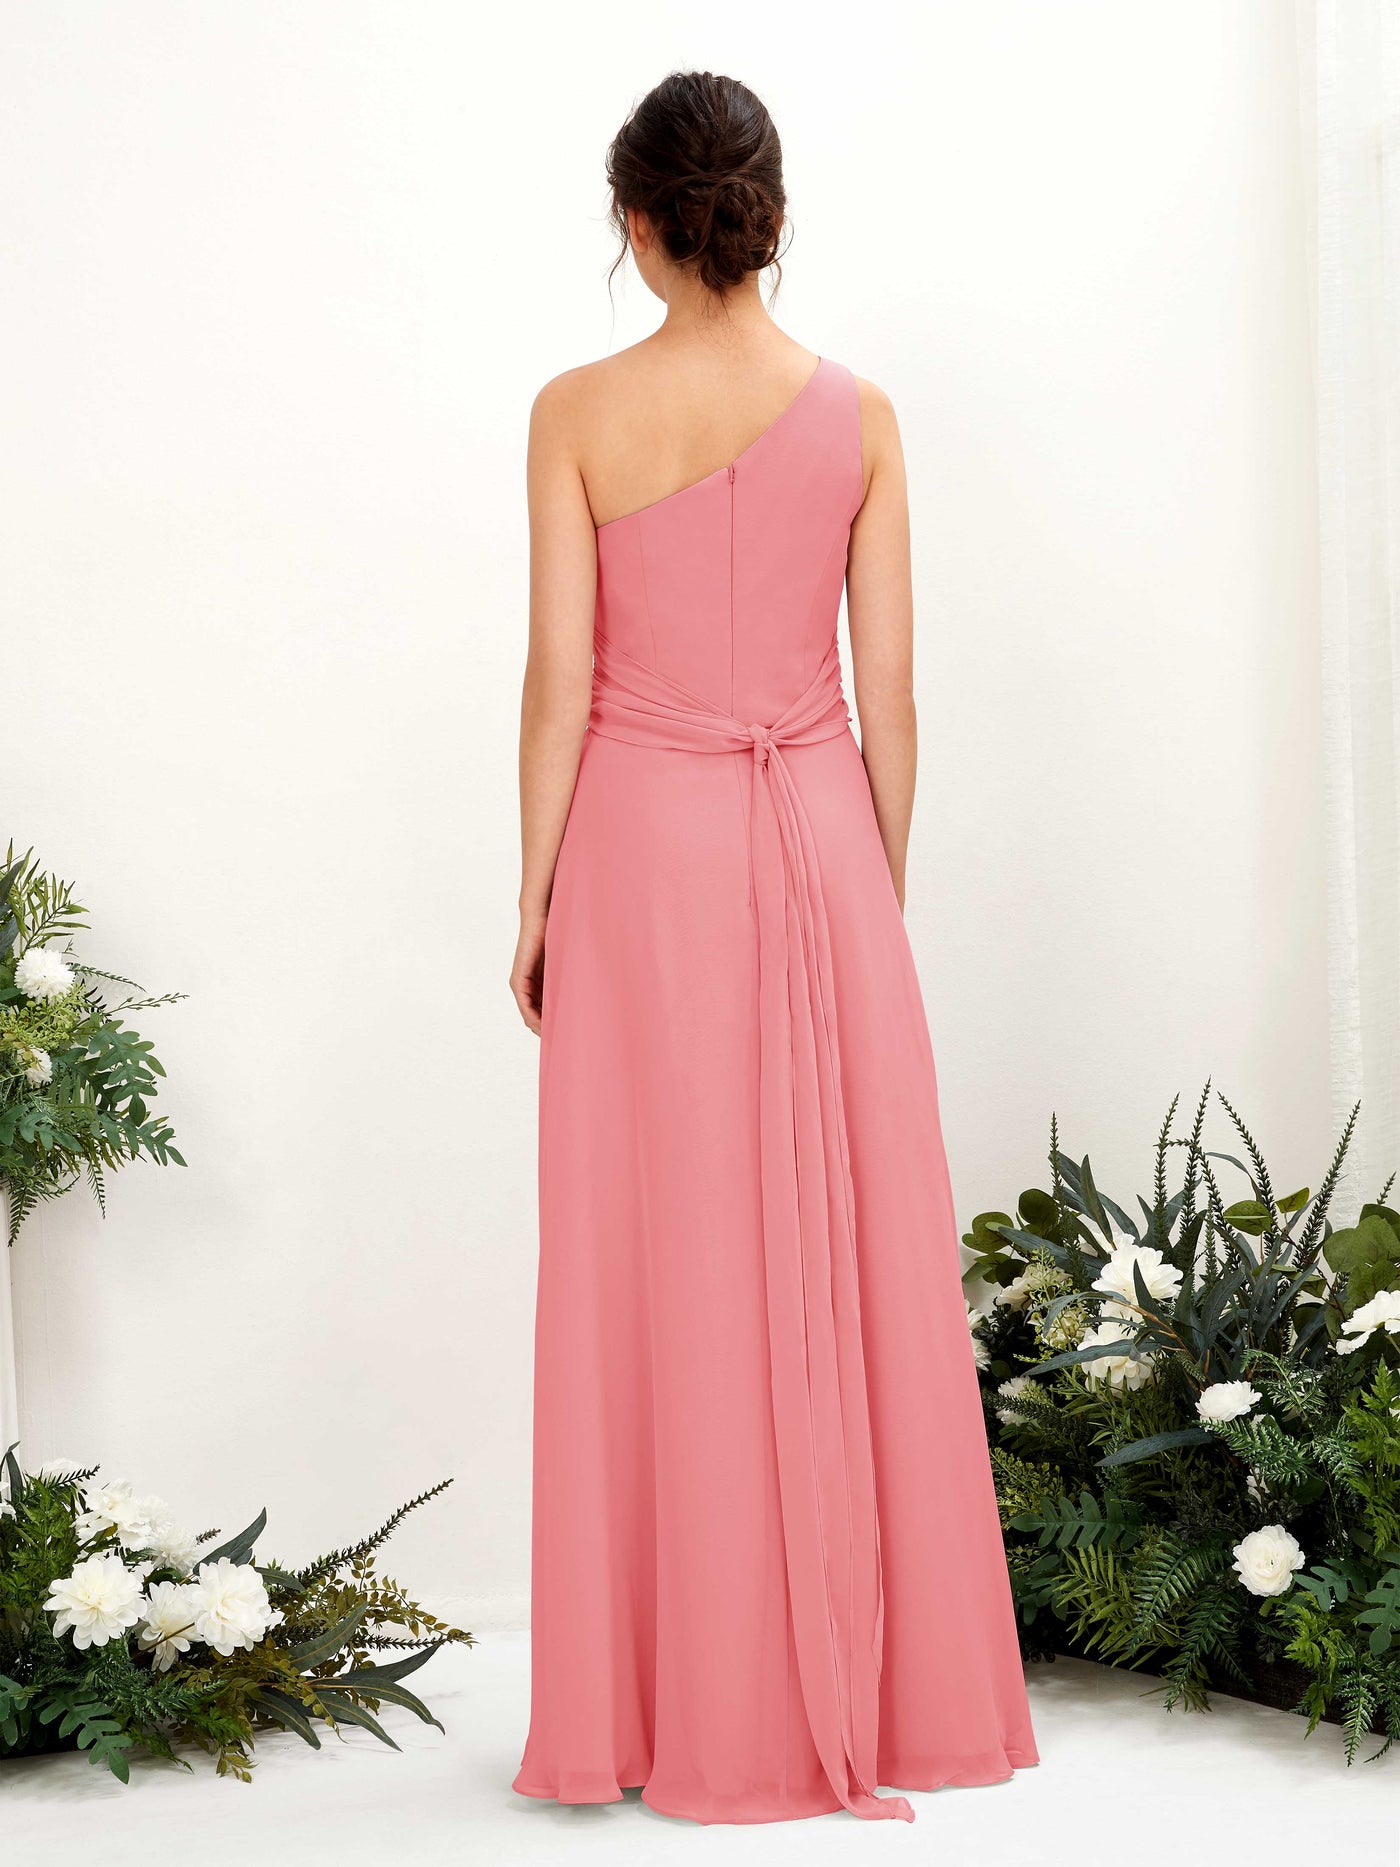 Coral Pink Bridesmaid Dresses Bridesmaid Dress A-line Chiffon One Shoulder Full Length Sleeveless Wedding Party Dress (81224730)#color_coral-pink